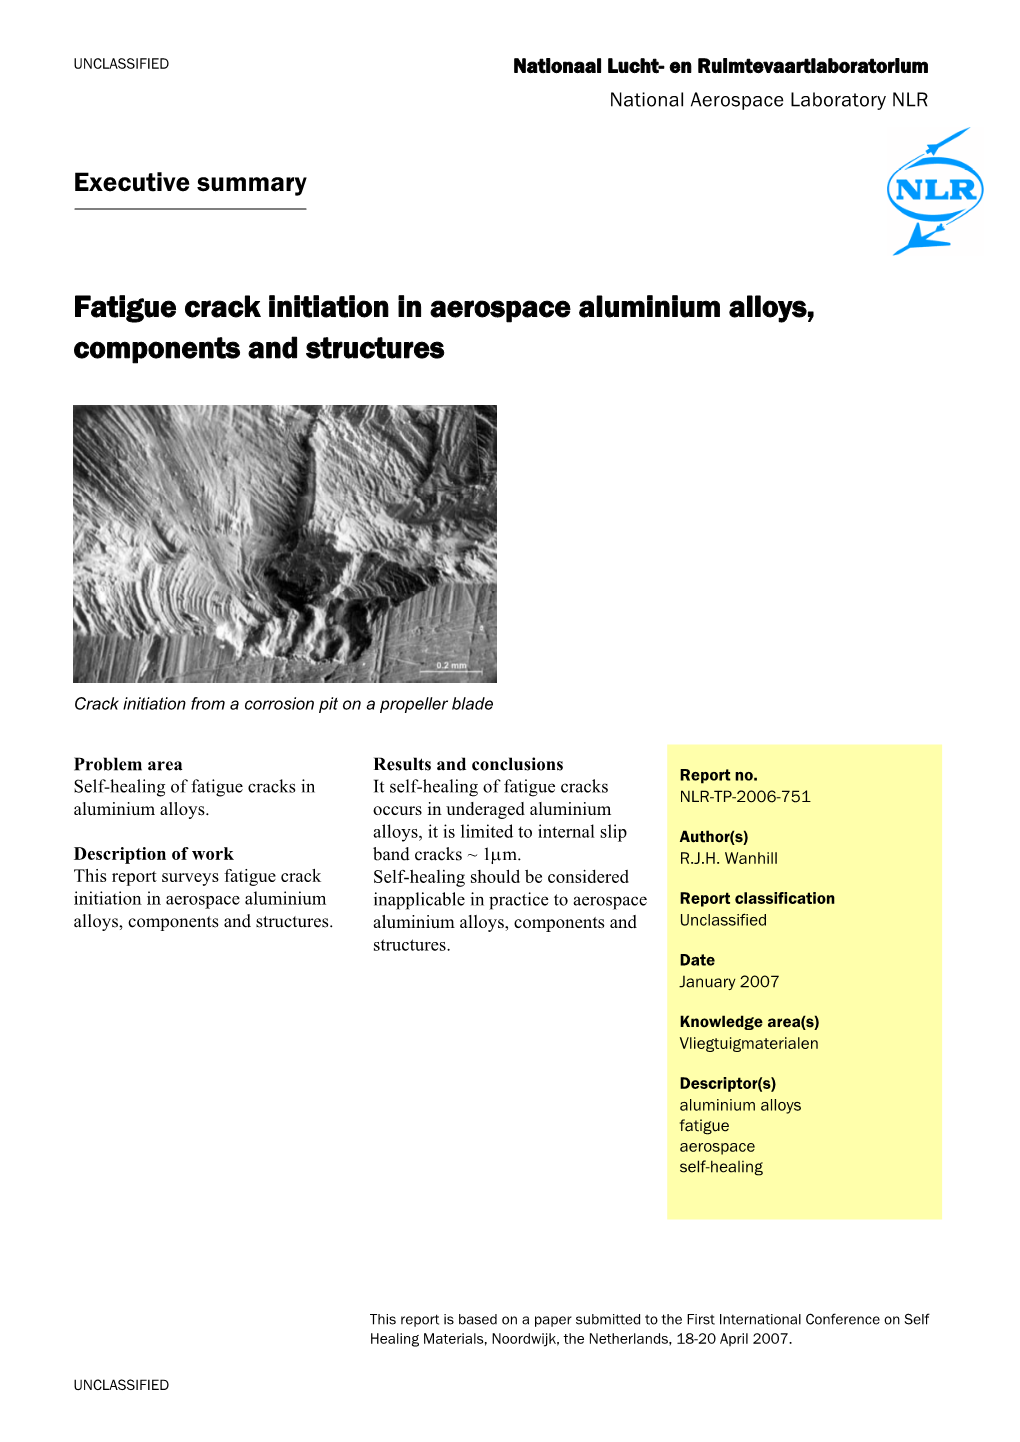 Fatigue Crack Initiation in Aerospace Aluminium Alloys, Components and Structures